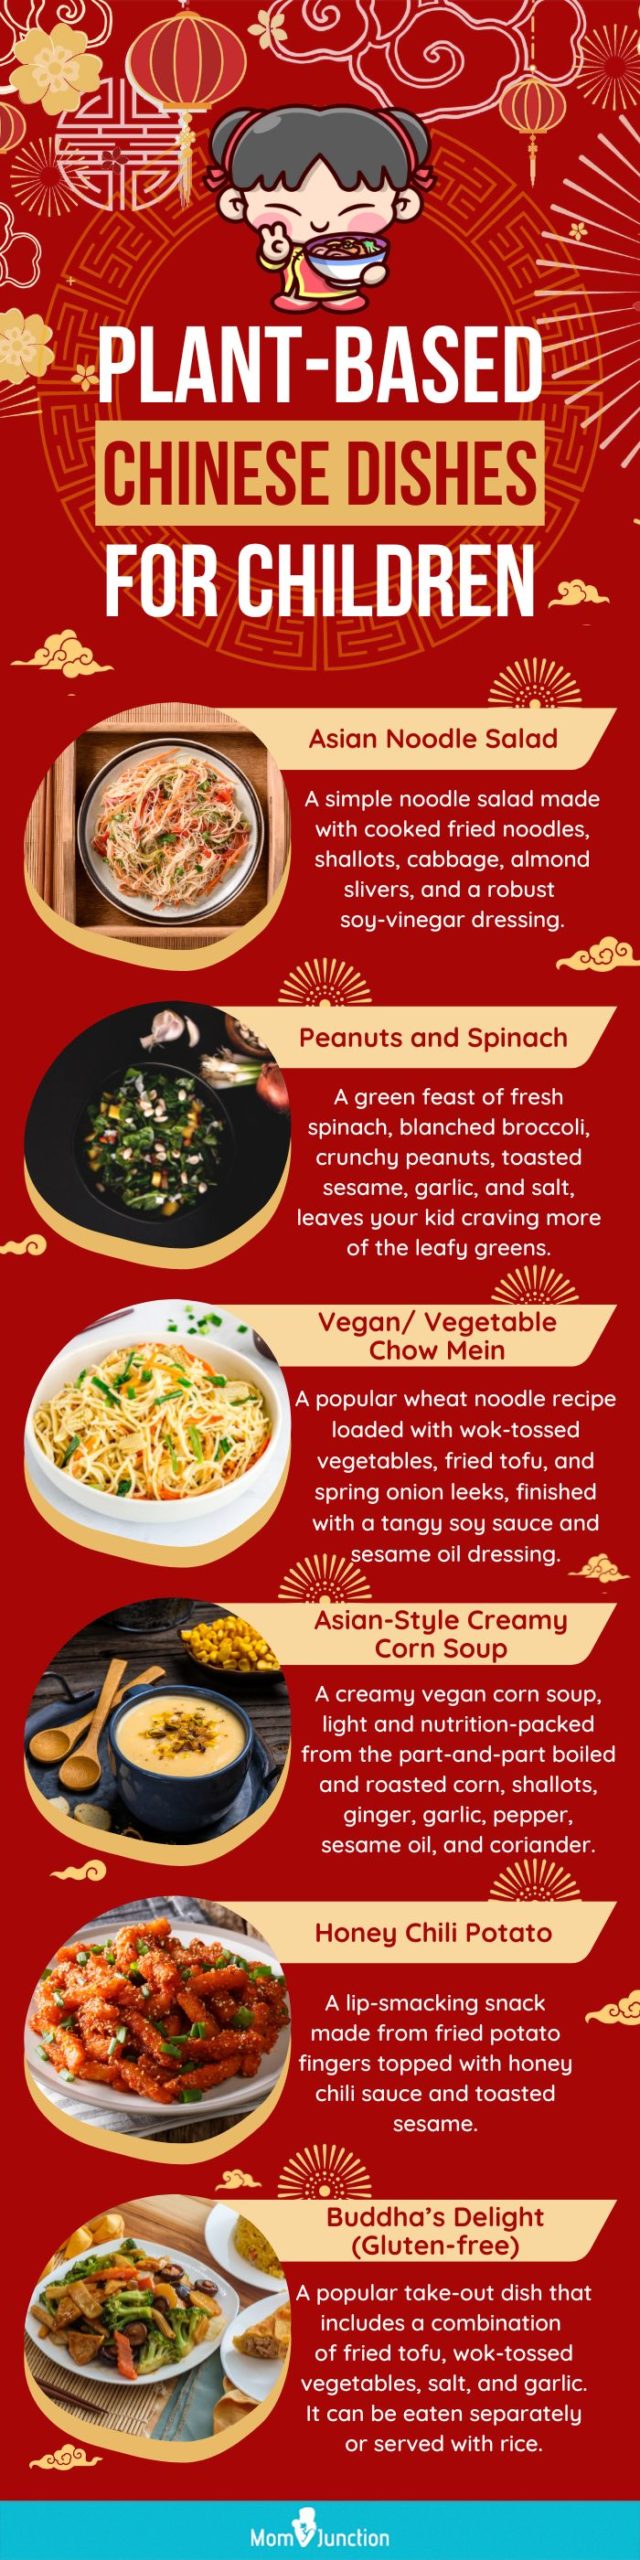 plant based chinese dishes for children (infographic)